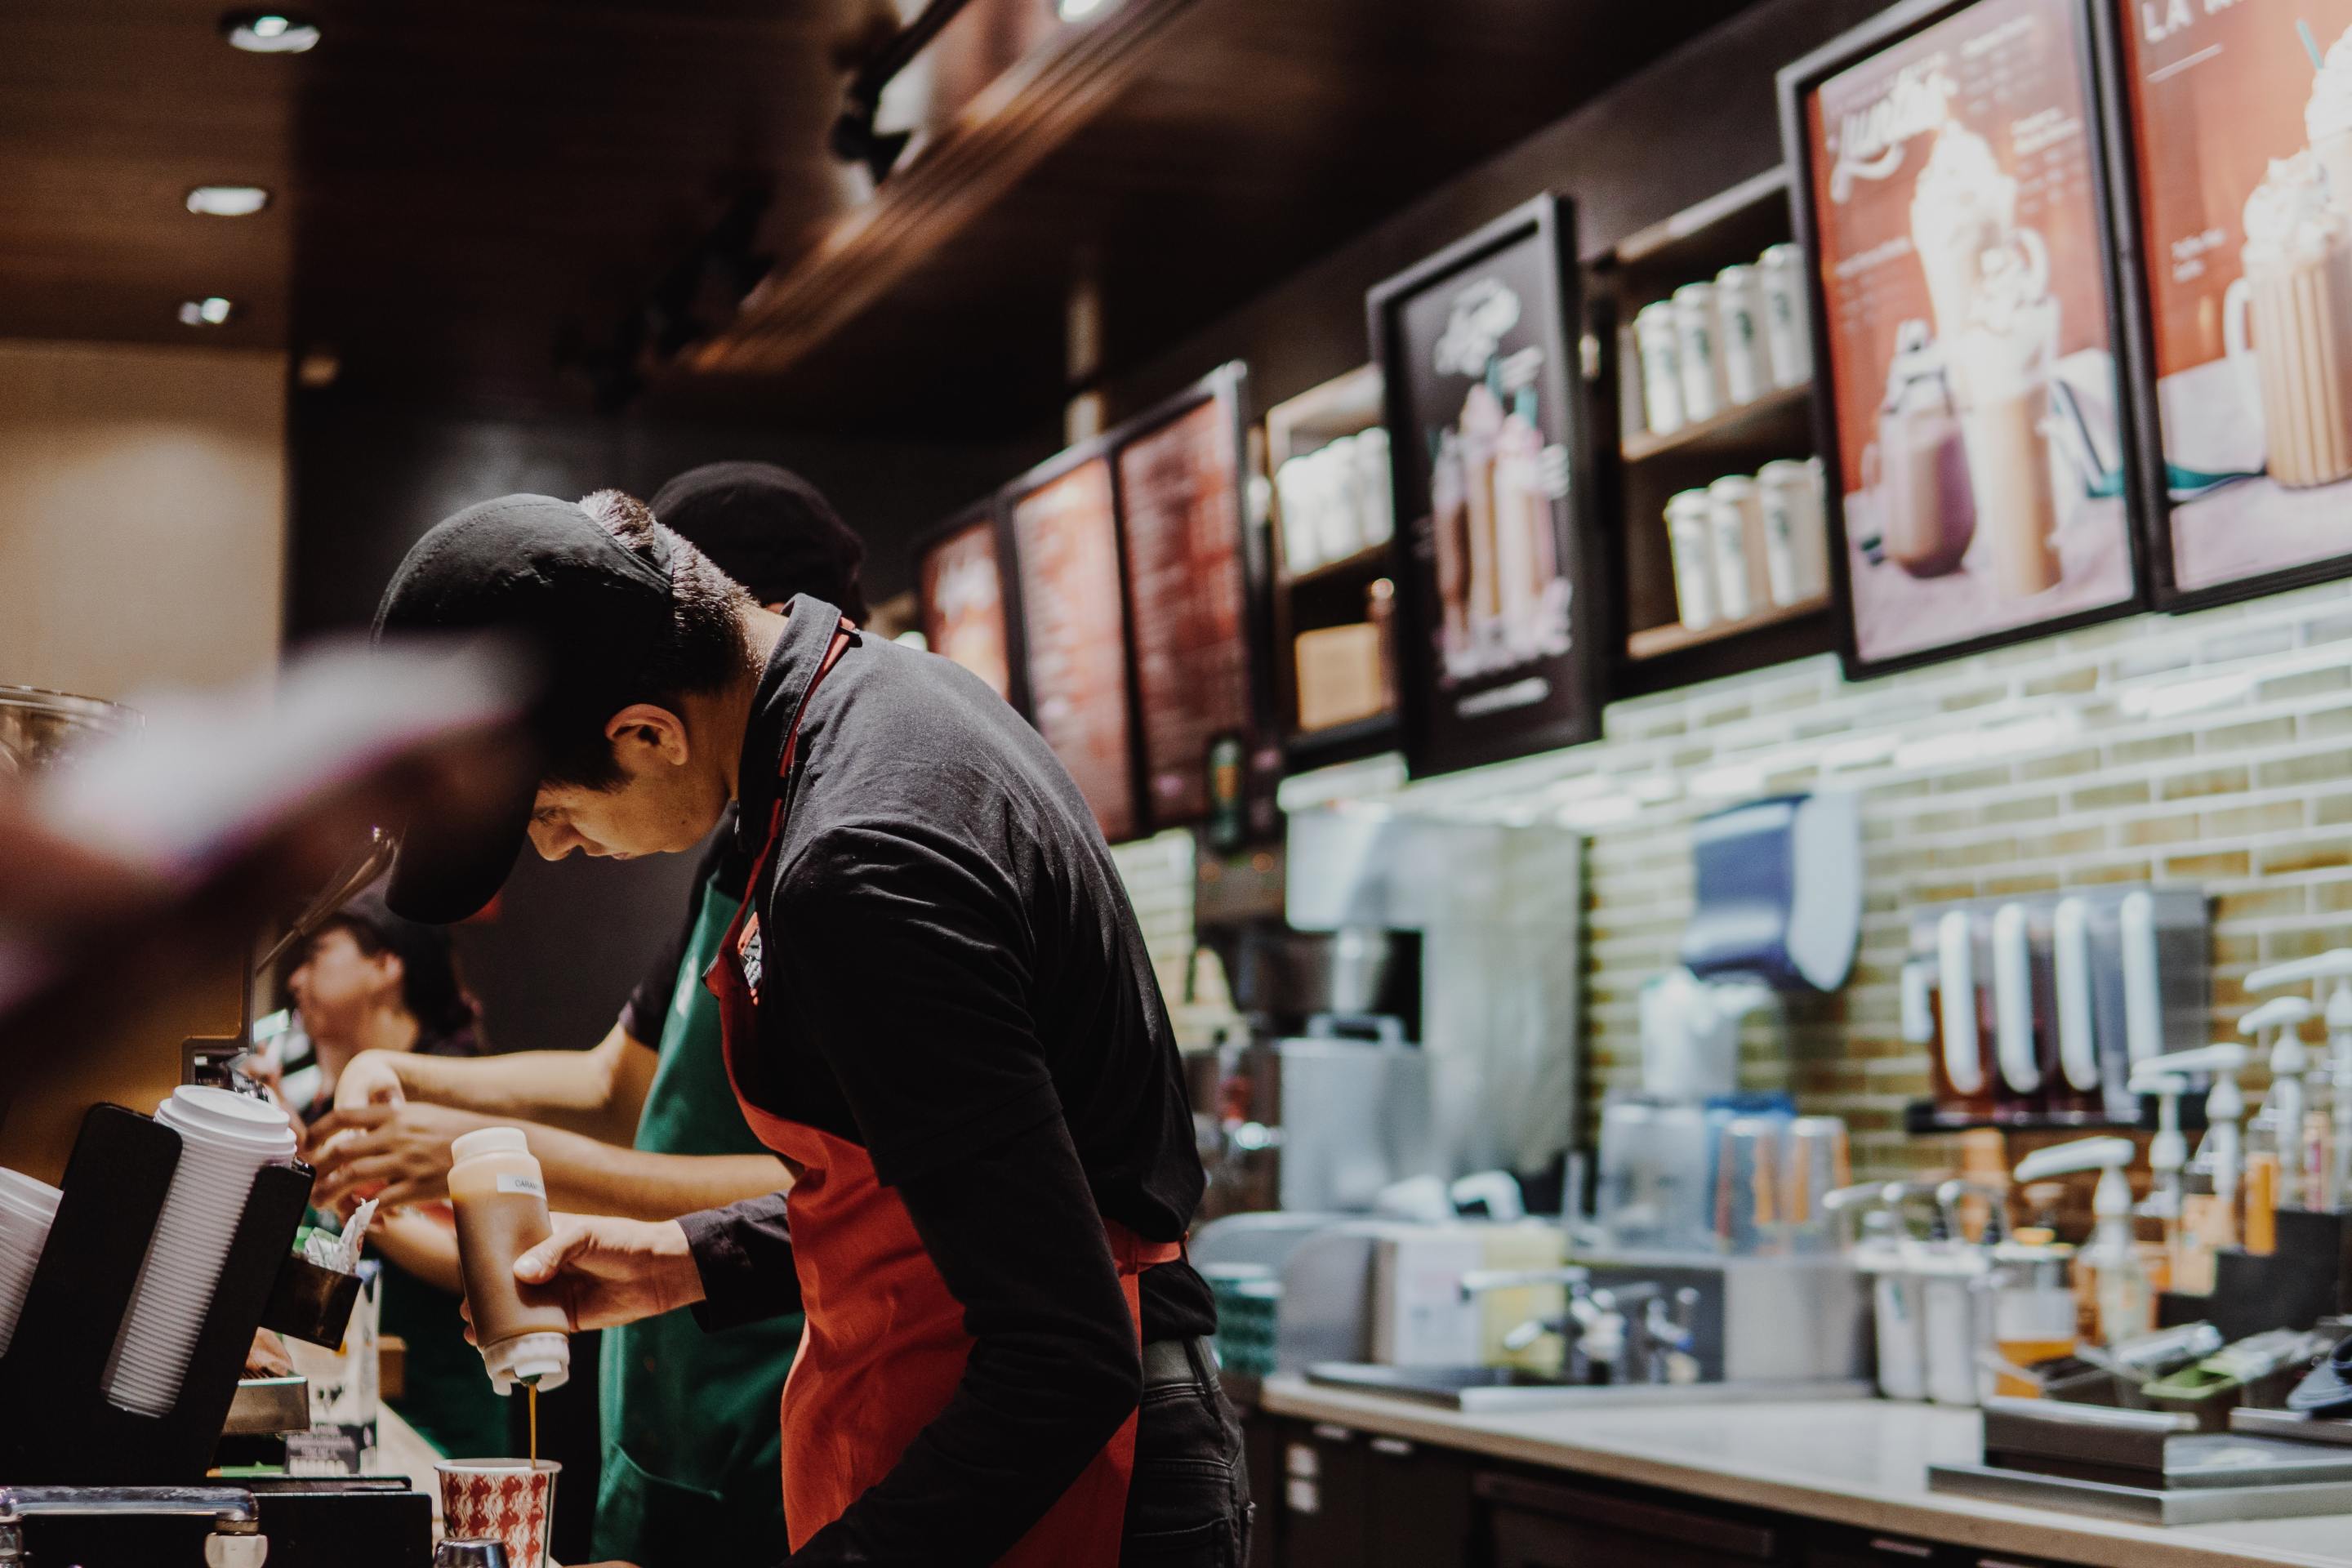 Two baristas work behind the counter at Starbucks